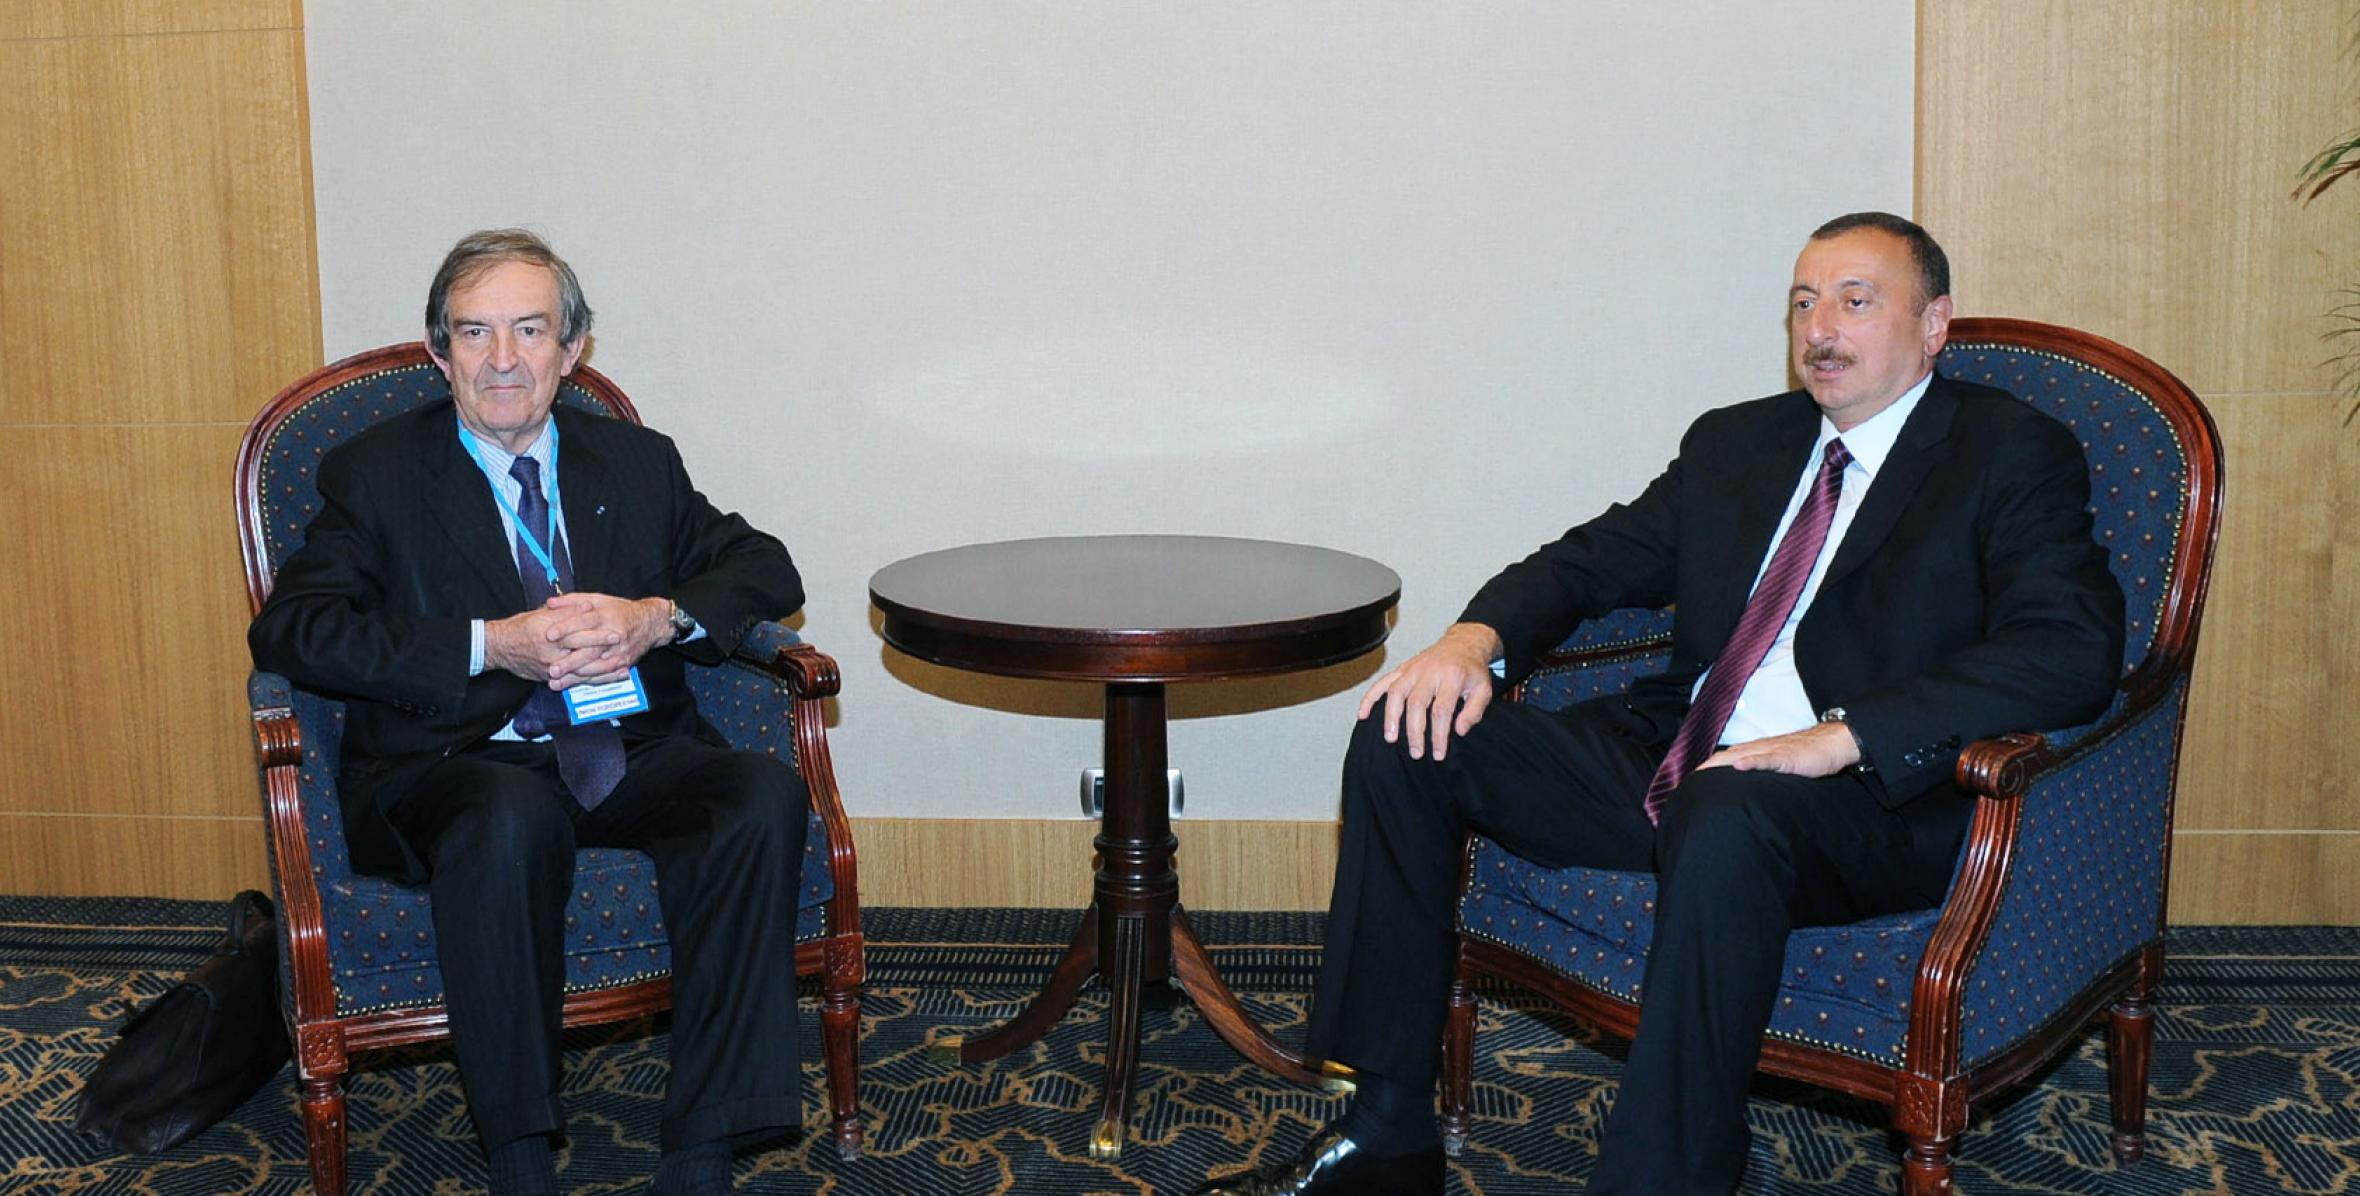 Ilham Aliyev met with French President’s special and personal adviser for anti-terrorism affairs, Jean-Louis Bruguiere